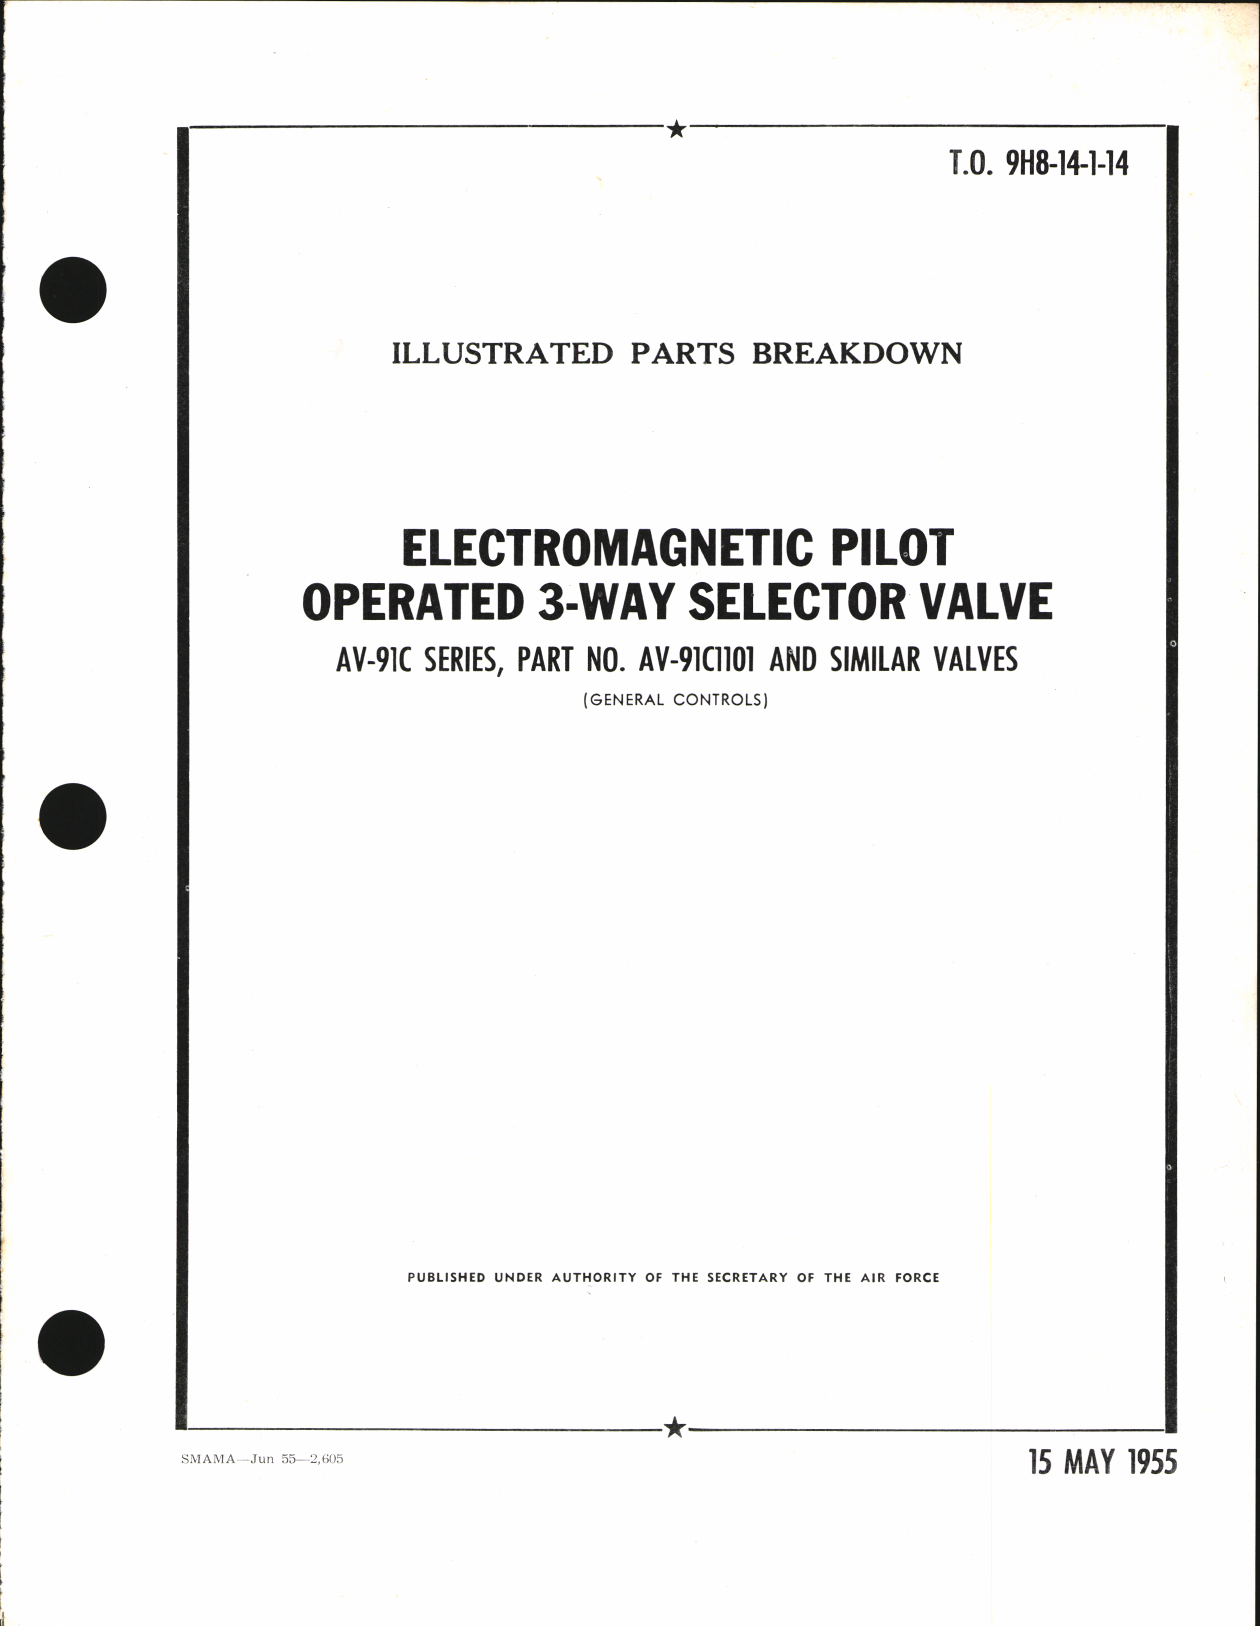 Sample page 1 from AirCorps Library document: Illustrated Parts Breakdown for Electromagnetic Pilot Operated 3-Way selector valve